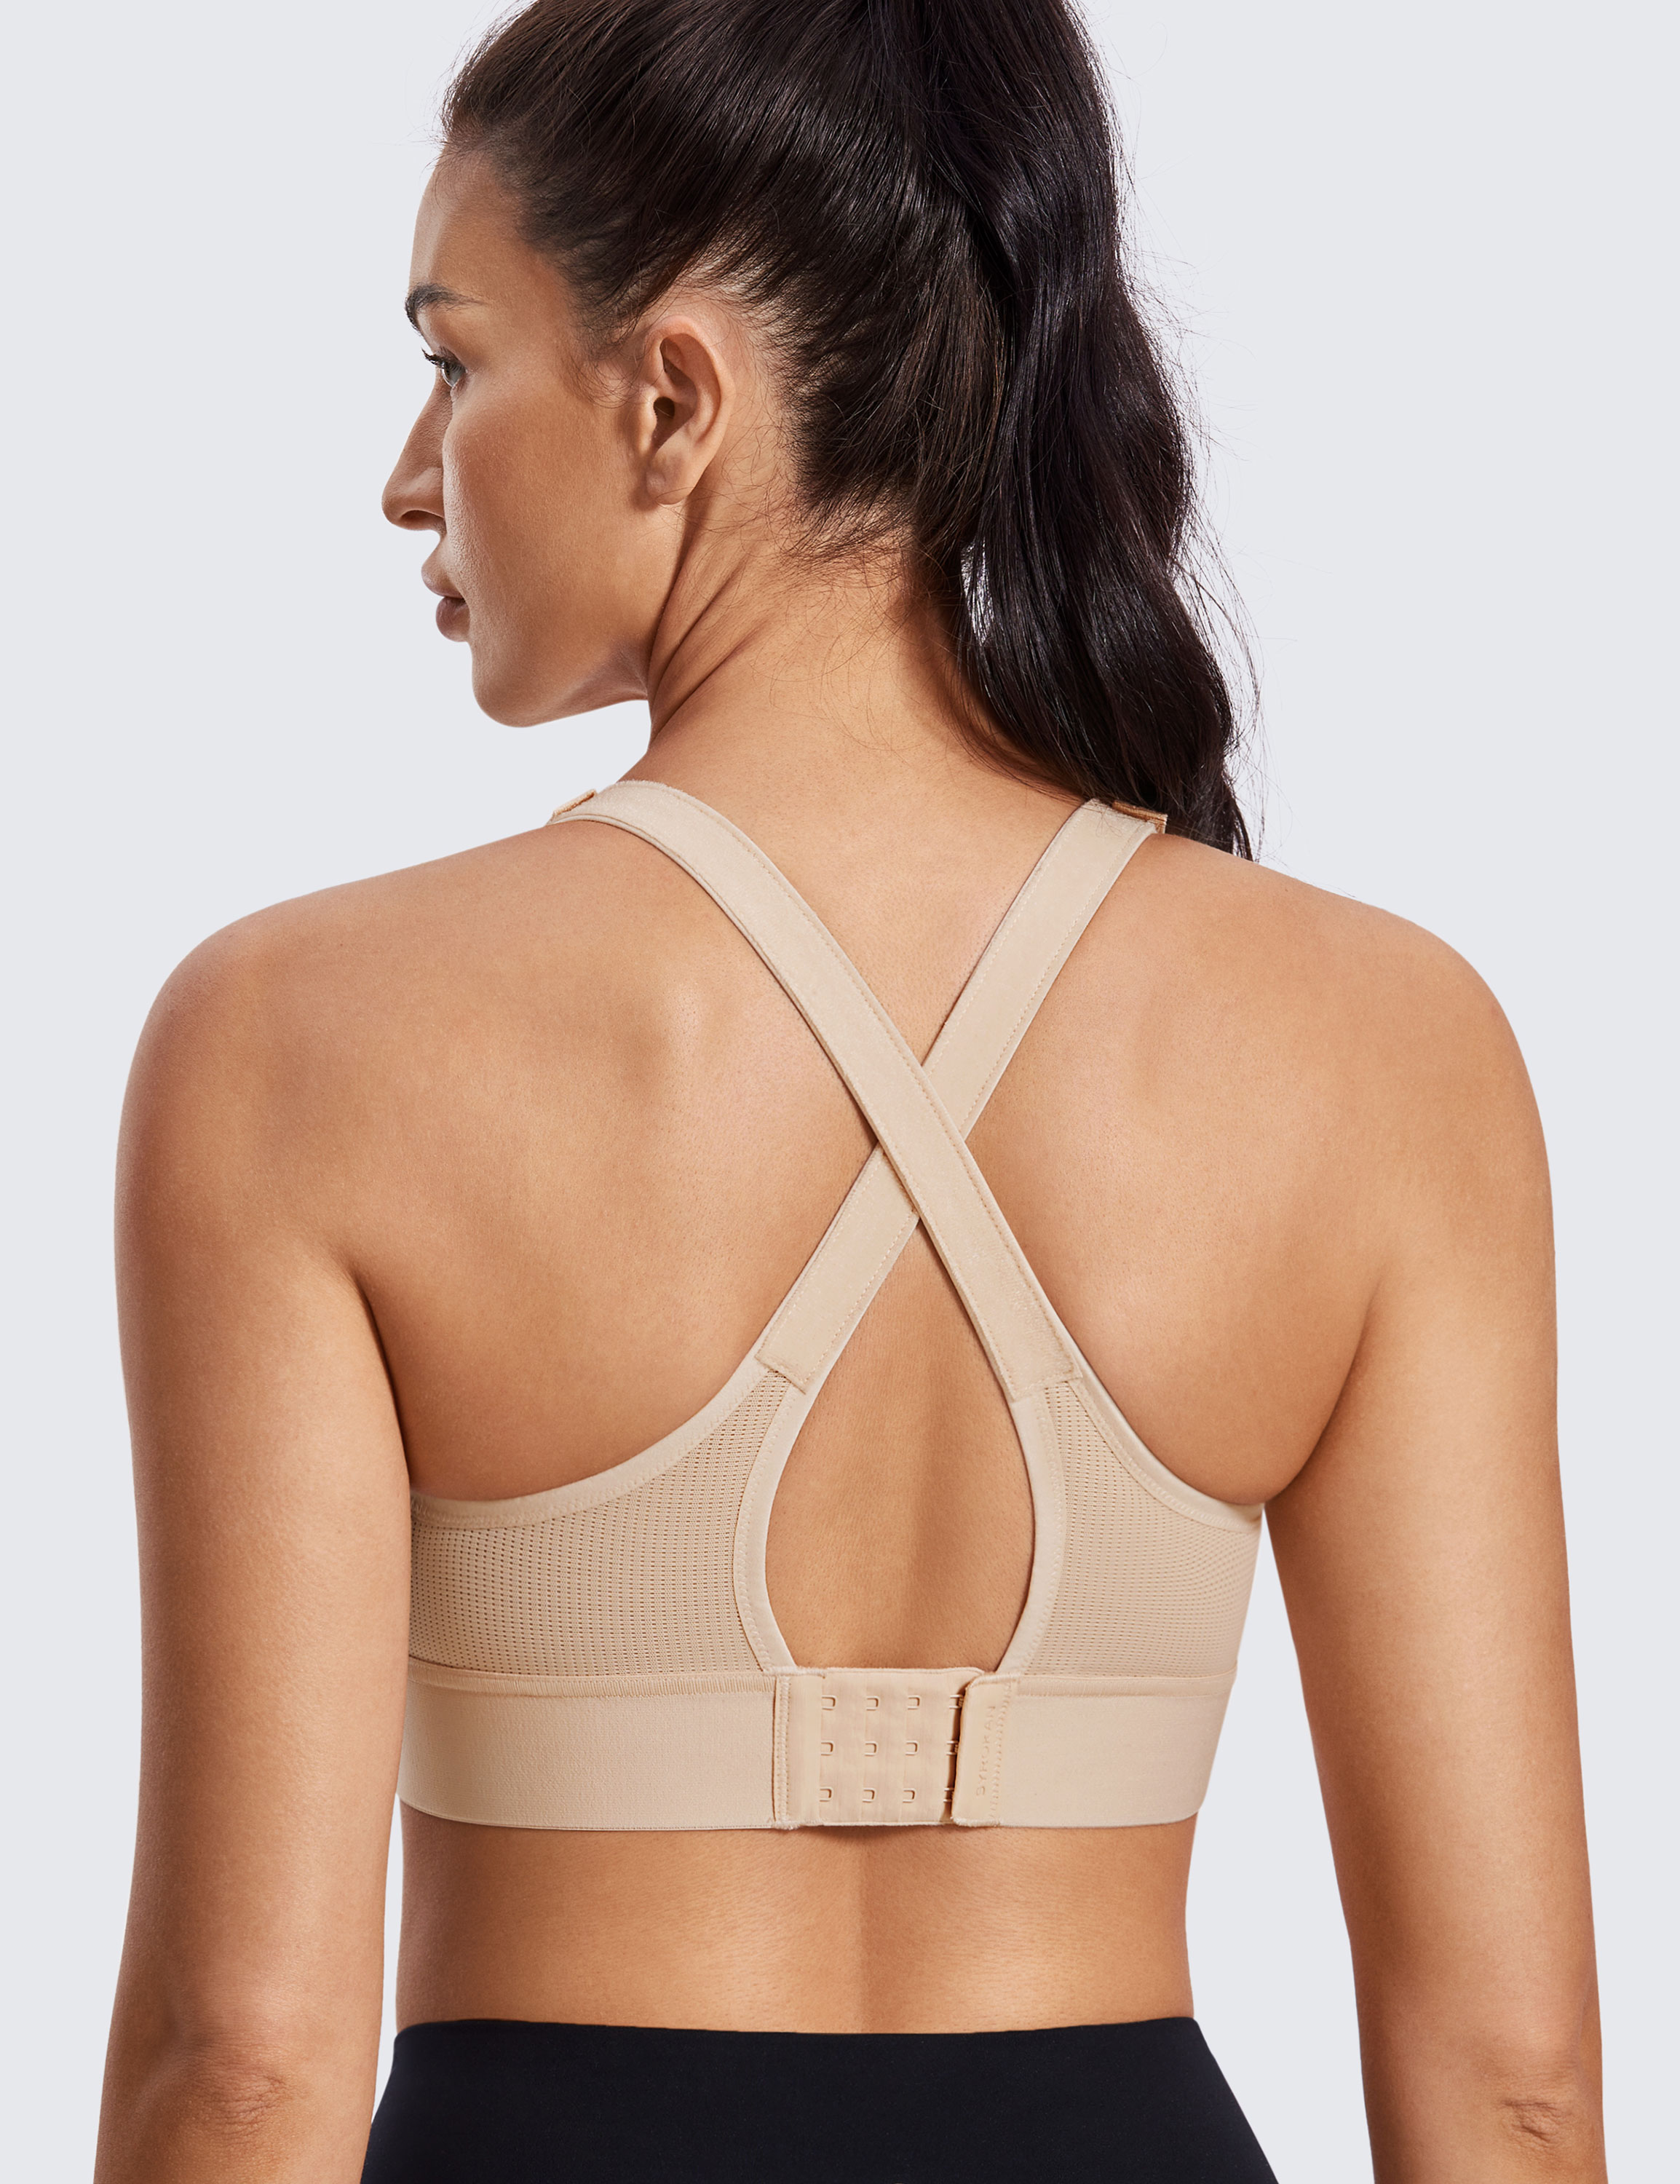 SYROKAN Sports Bra Front Adjustable High Impact Support Lightly